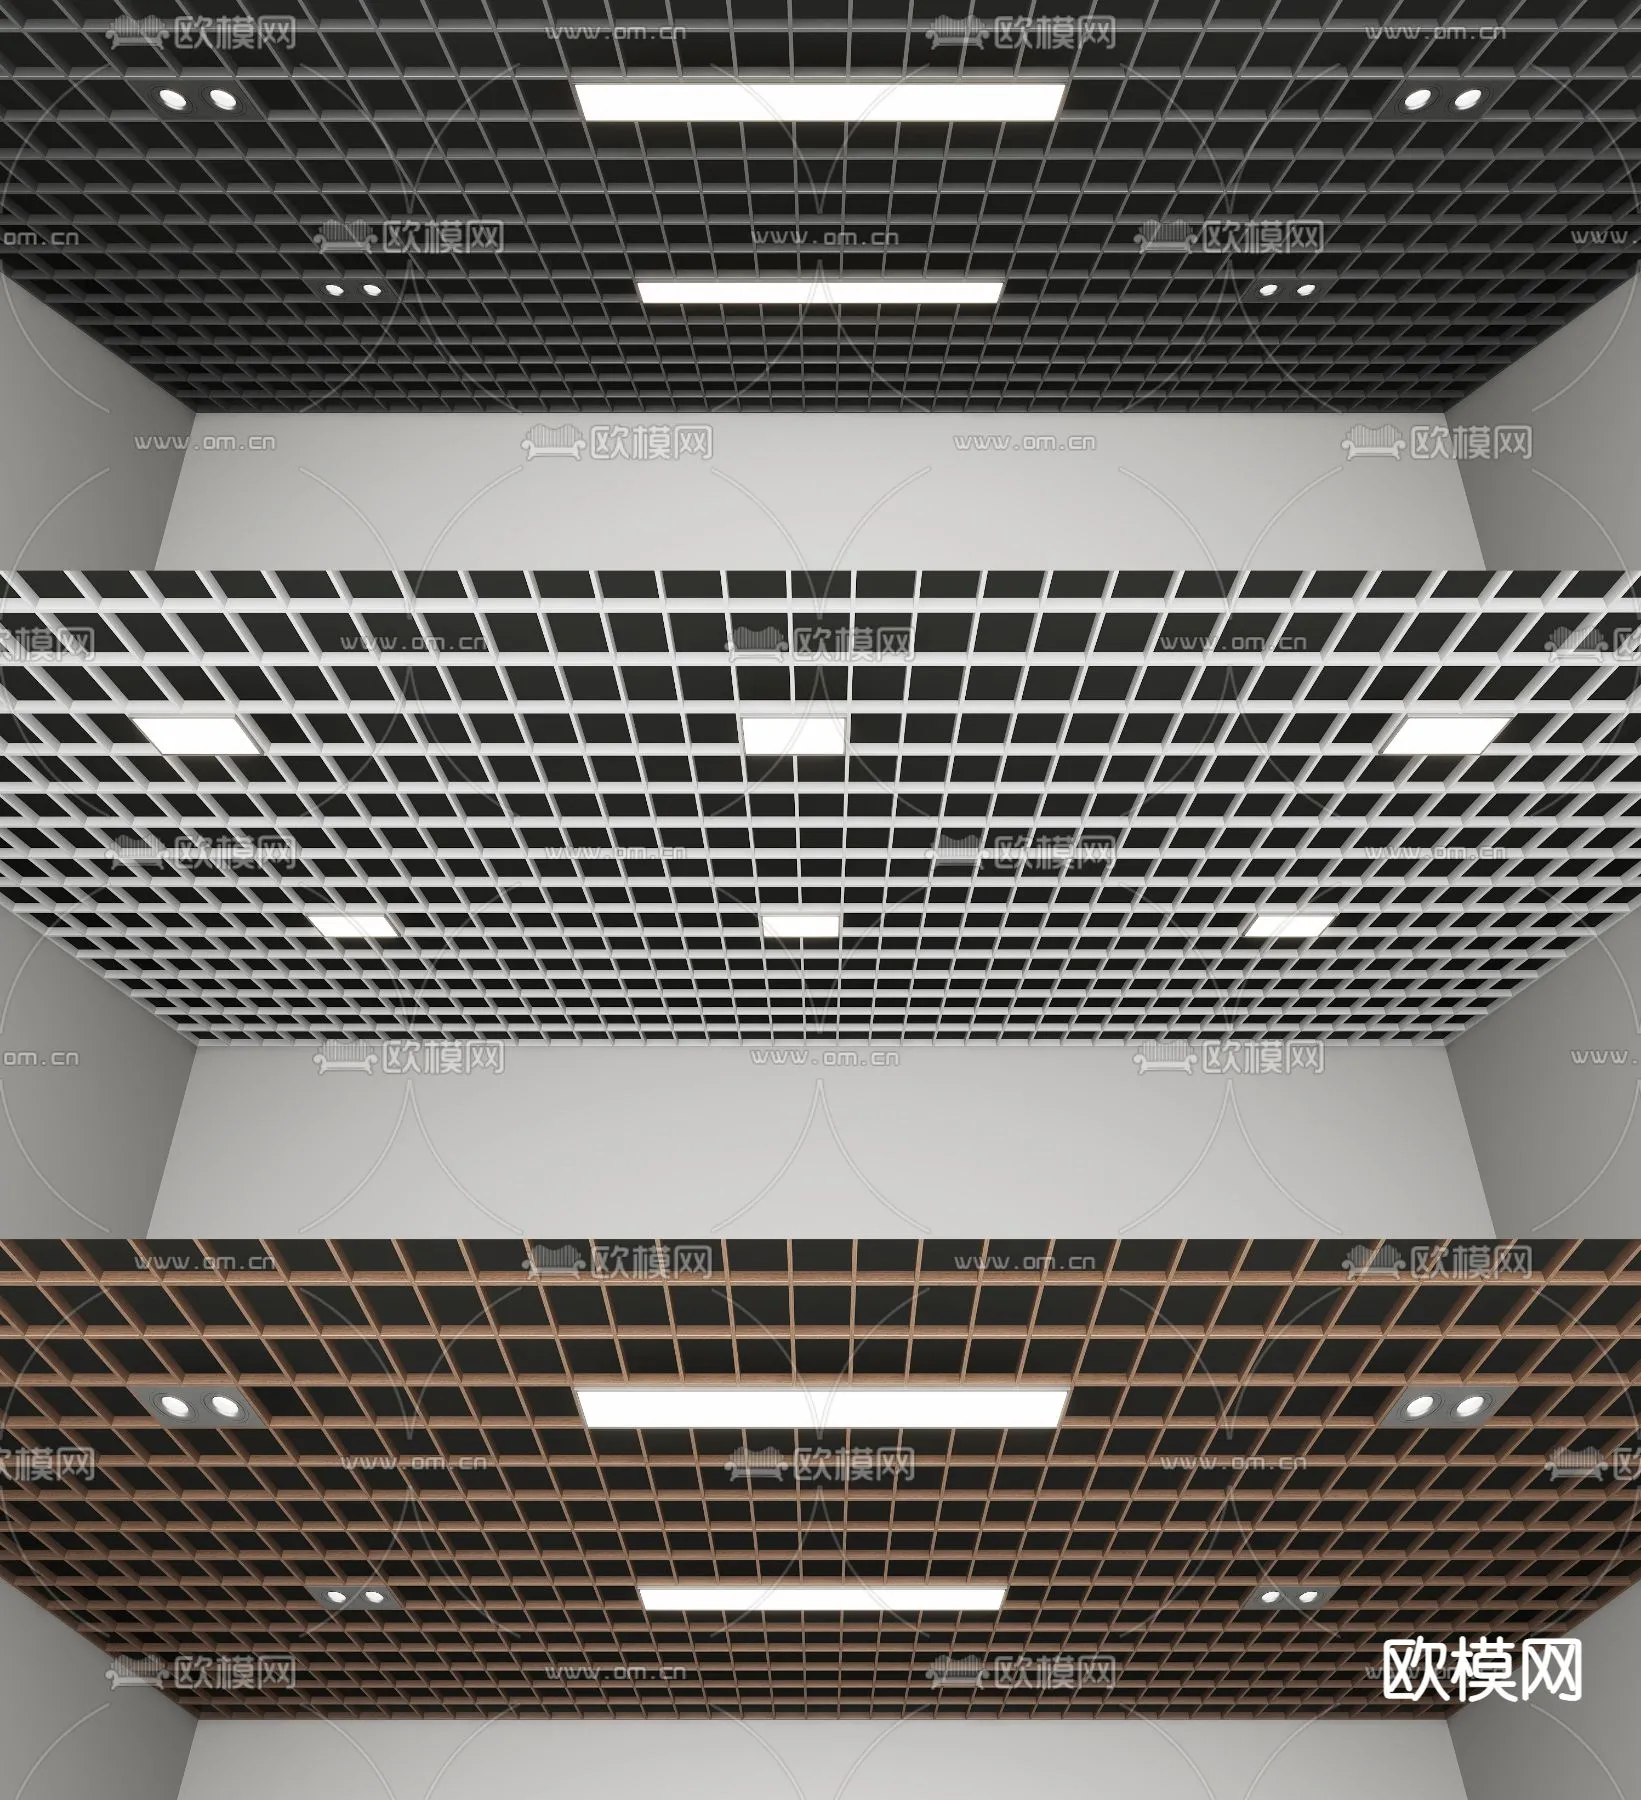 3DS MAX – DETAIL – CEILING – VRAY / CORONA – 3D MODEL – 3180